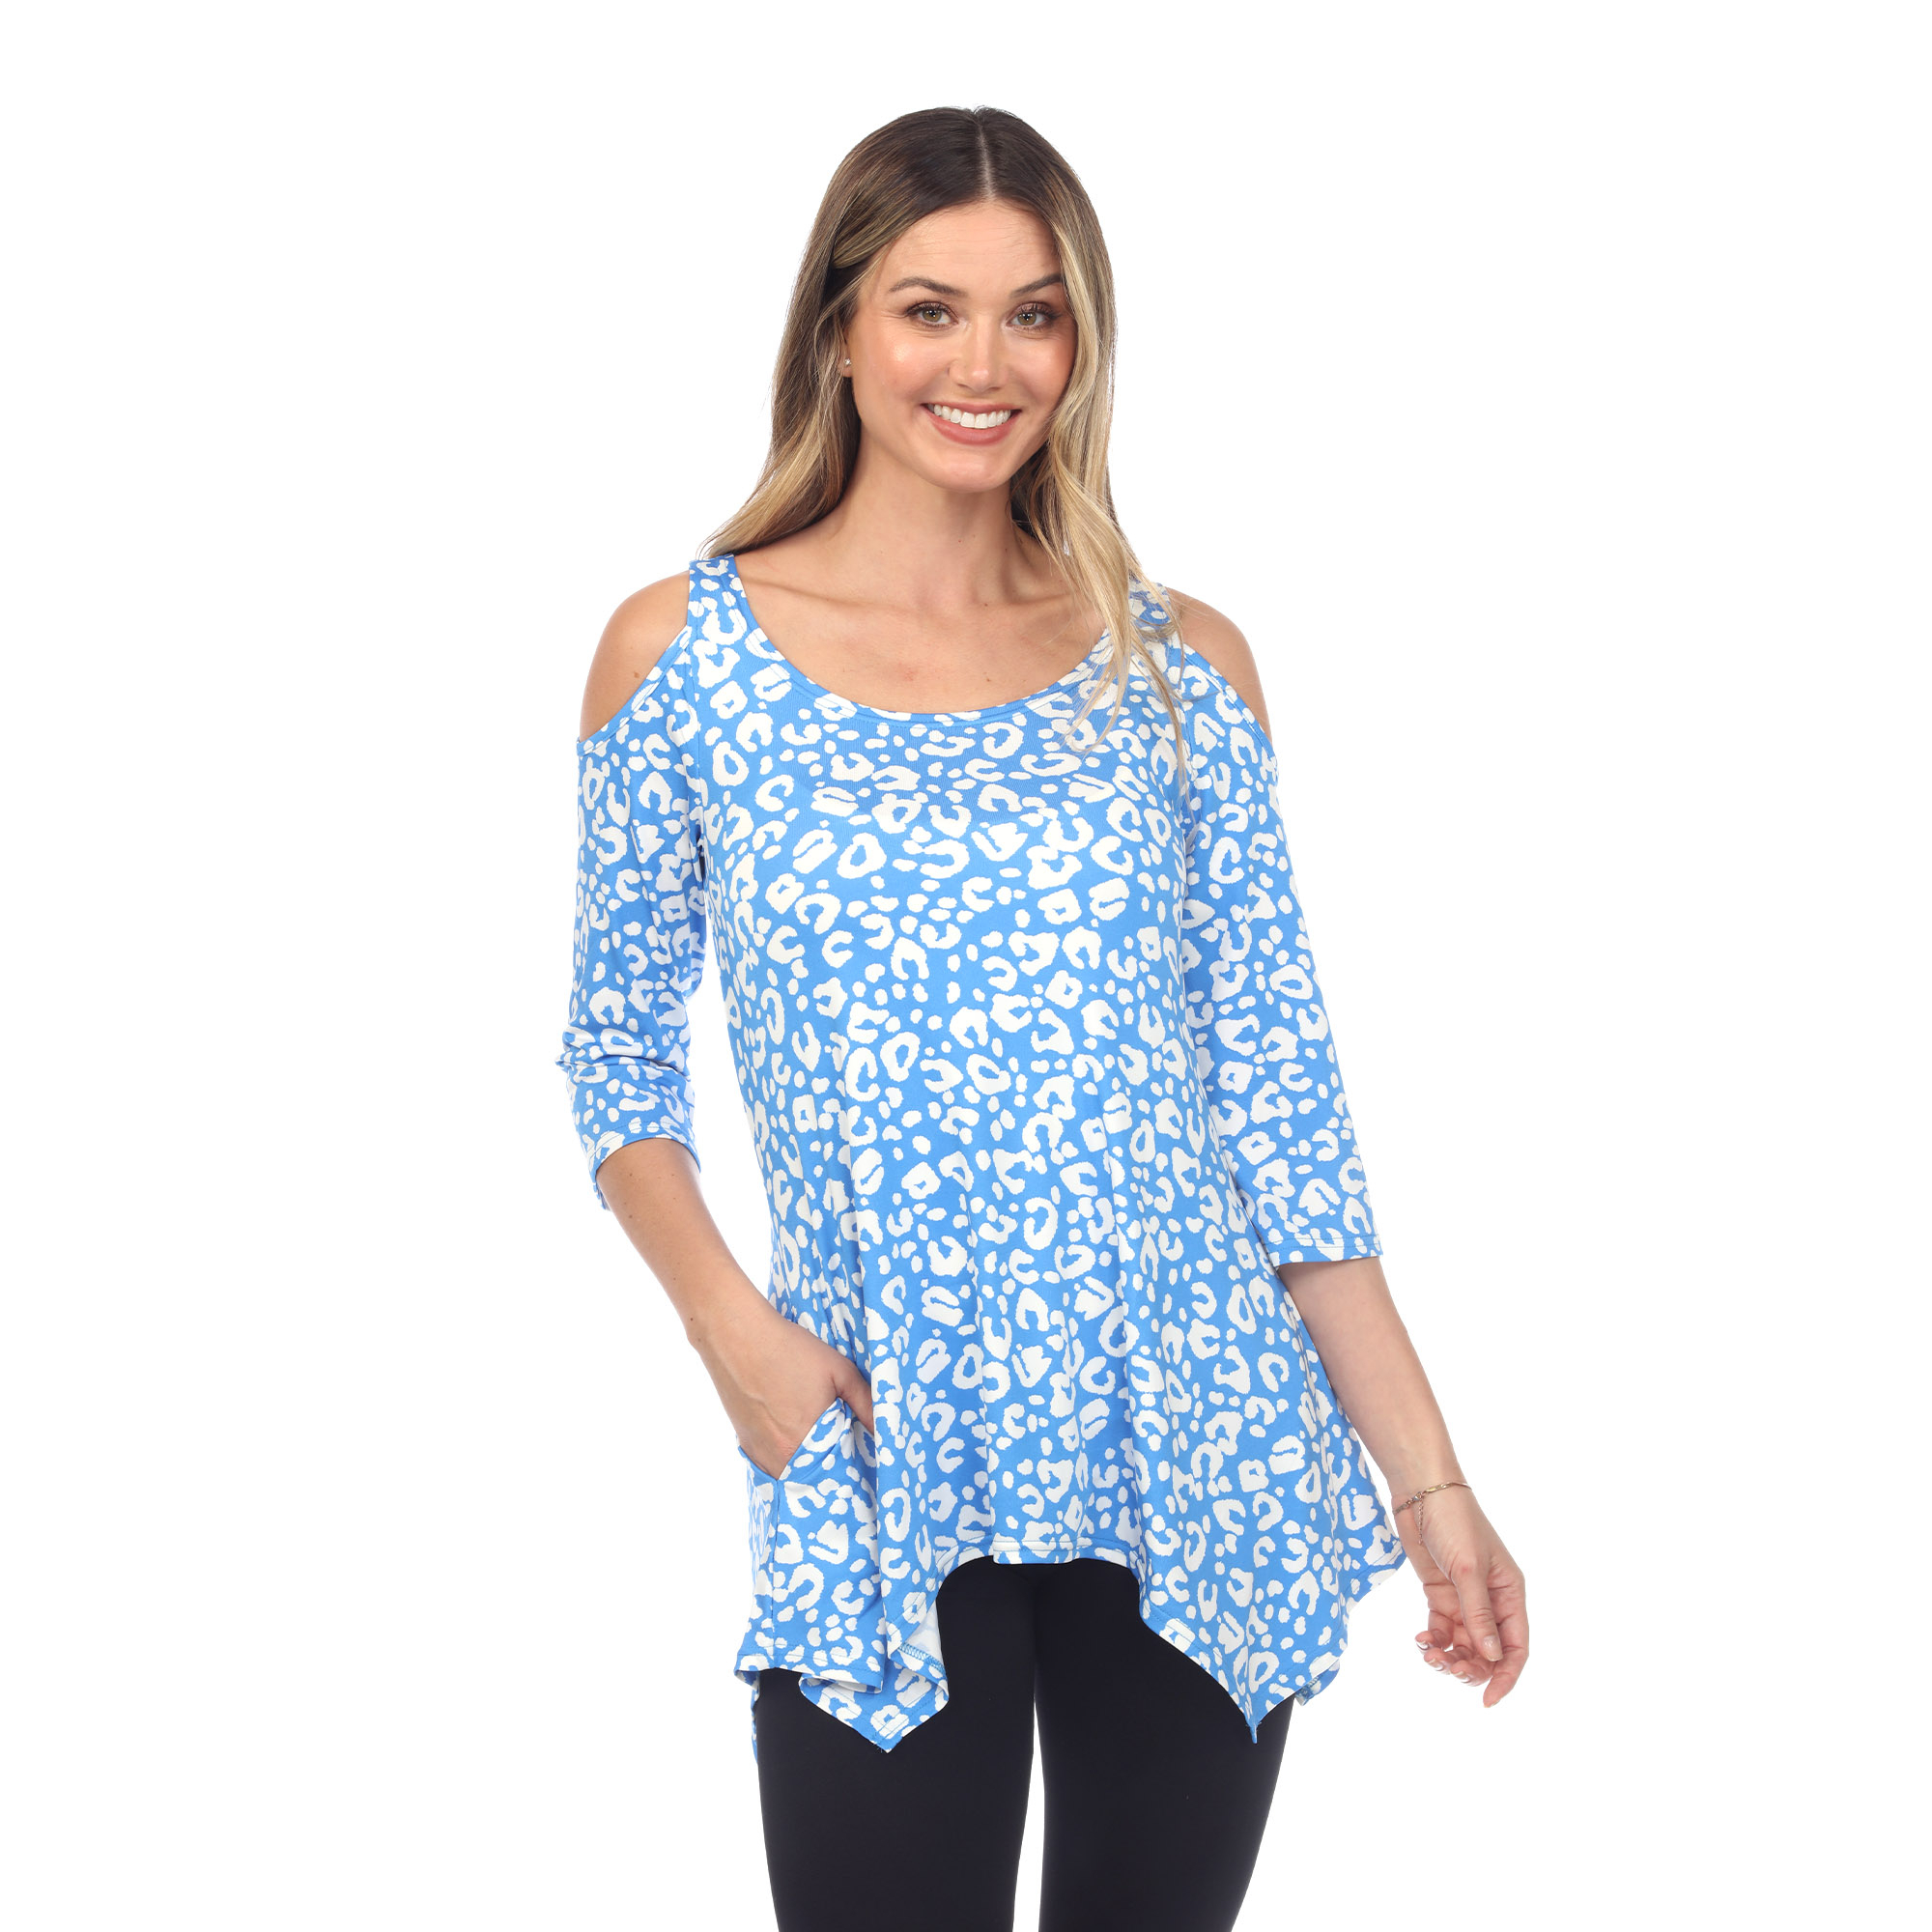 White Mark Women's Leopard Print Cold Shoulder Tunic Top With Pockets - Blue, Small